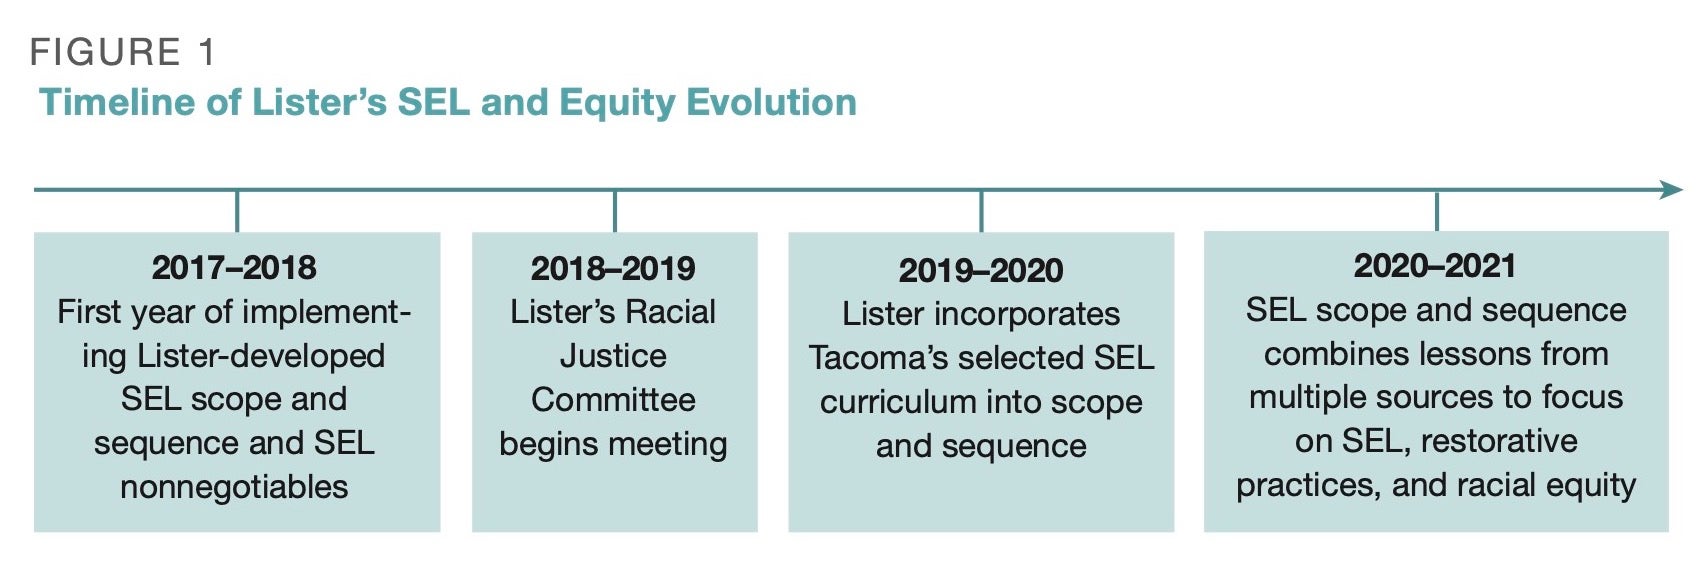 Timeline of Lister’s SEL and Equity Evolution